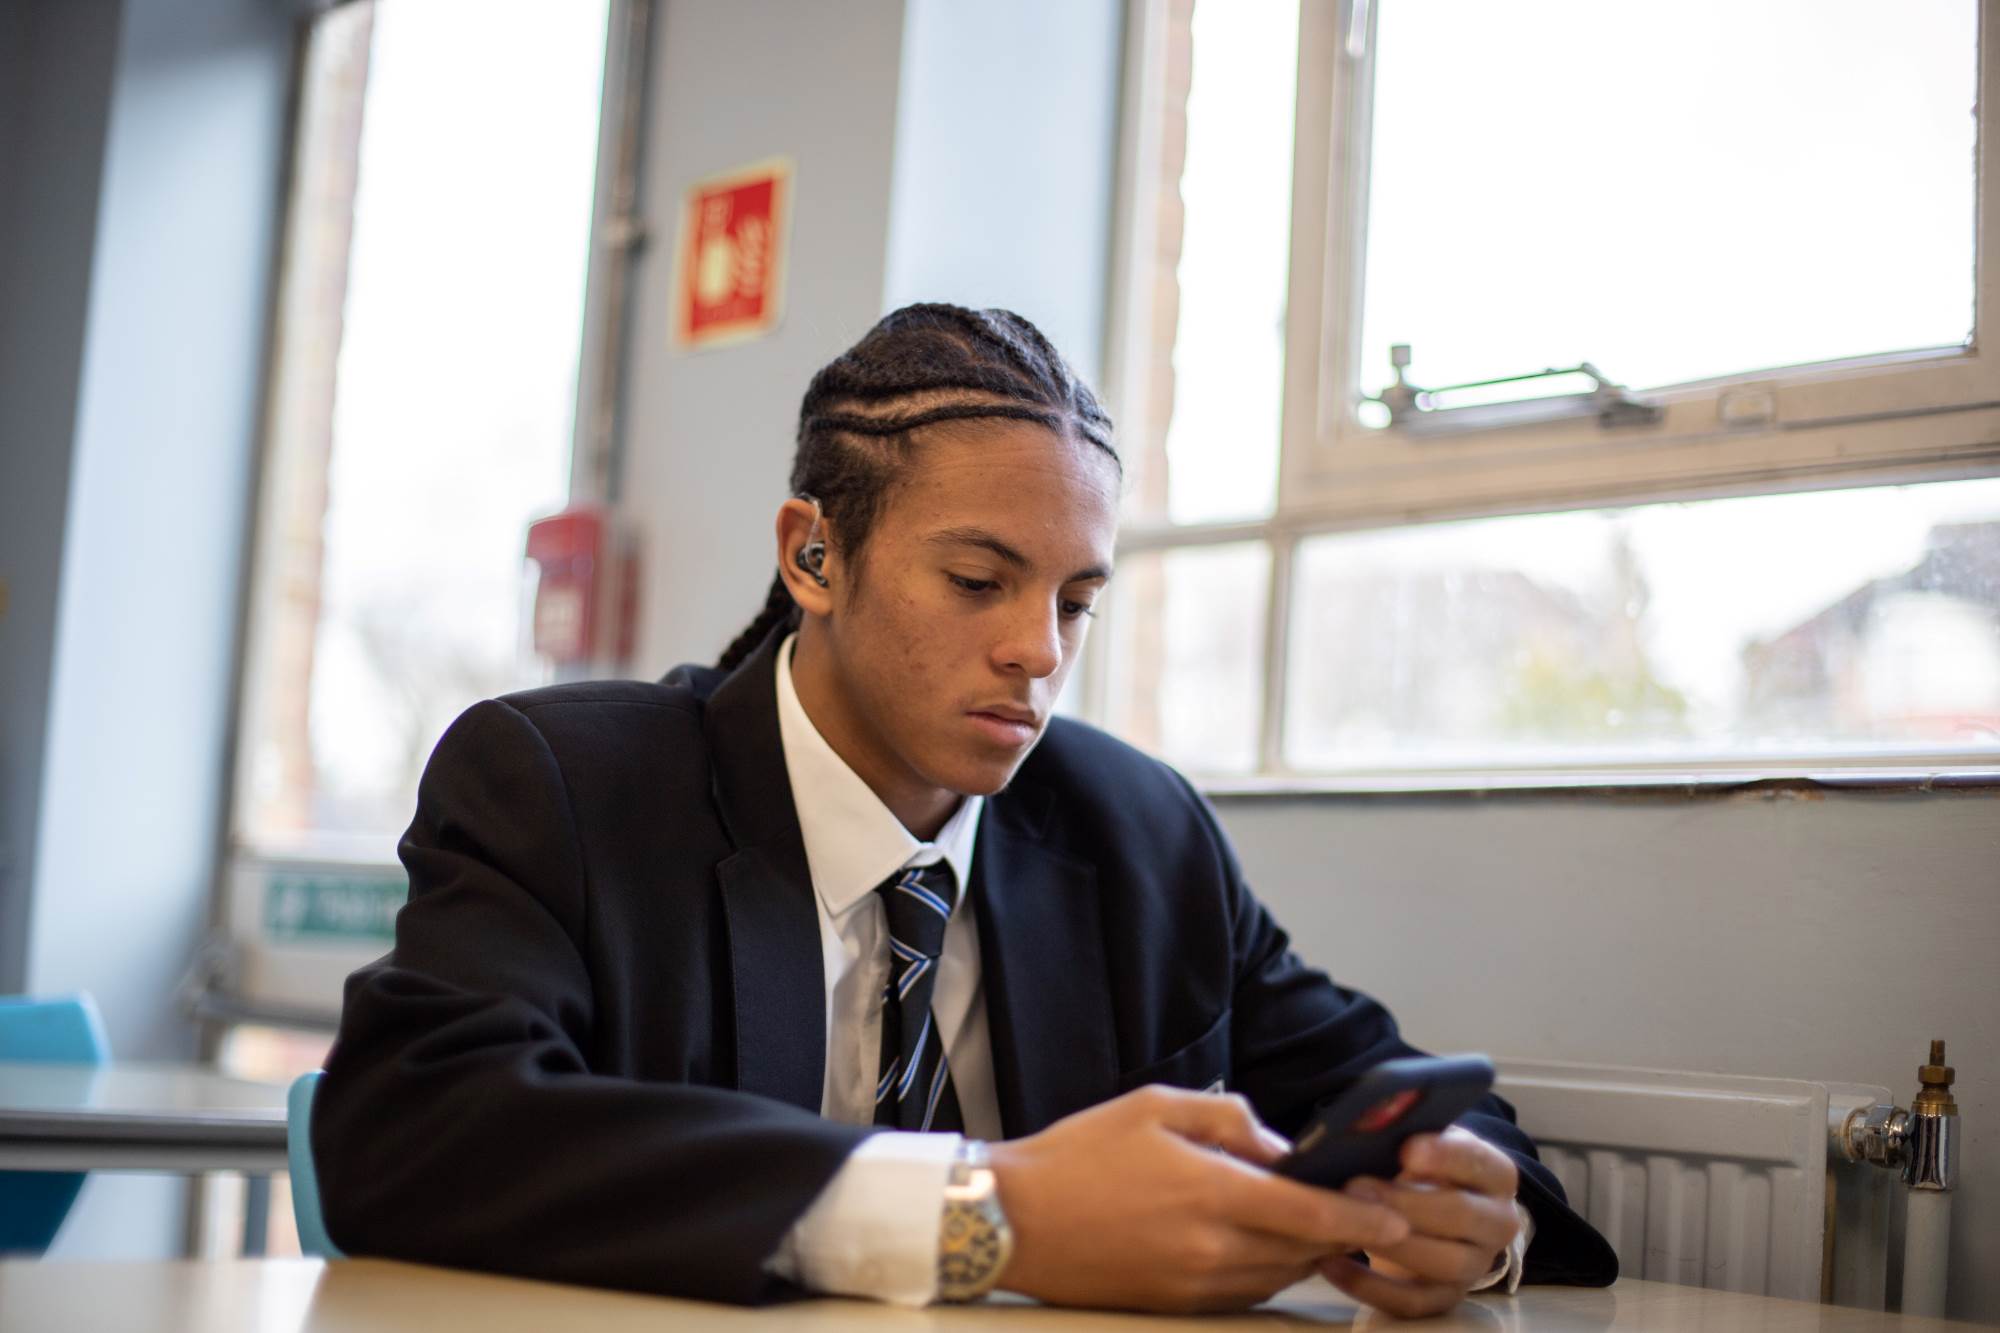 Young Person Texting At Desk